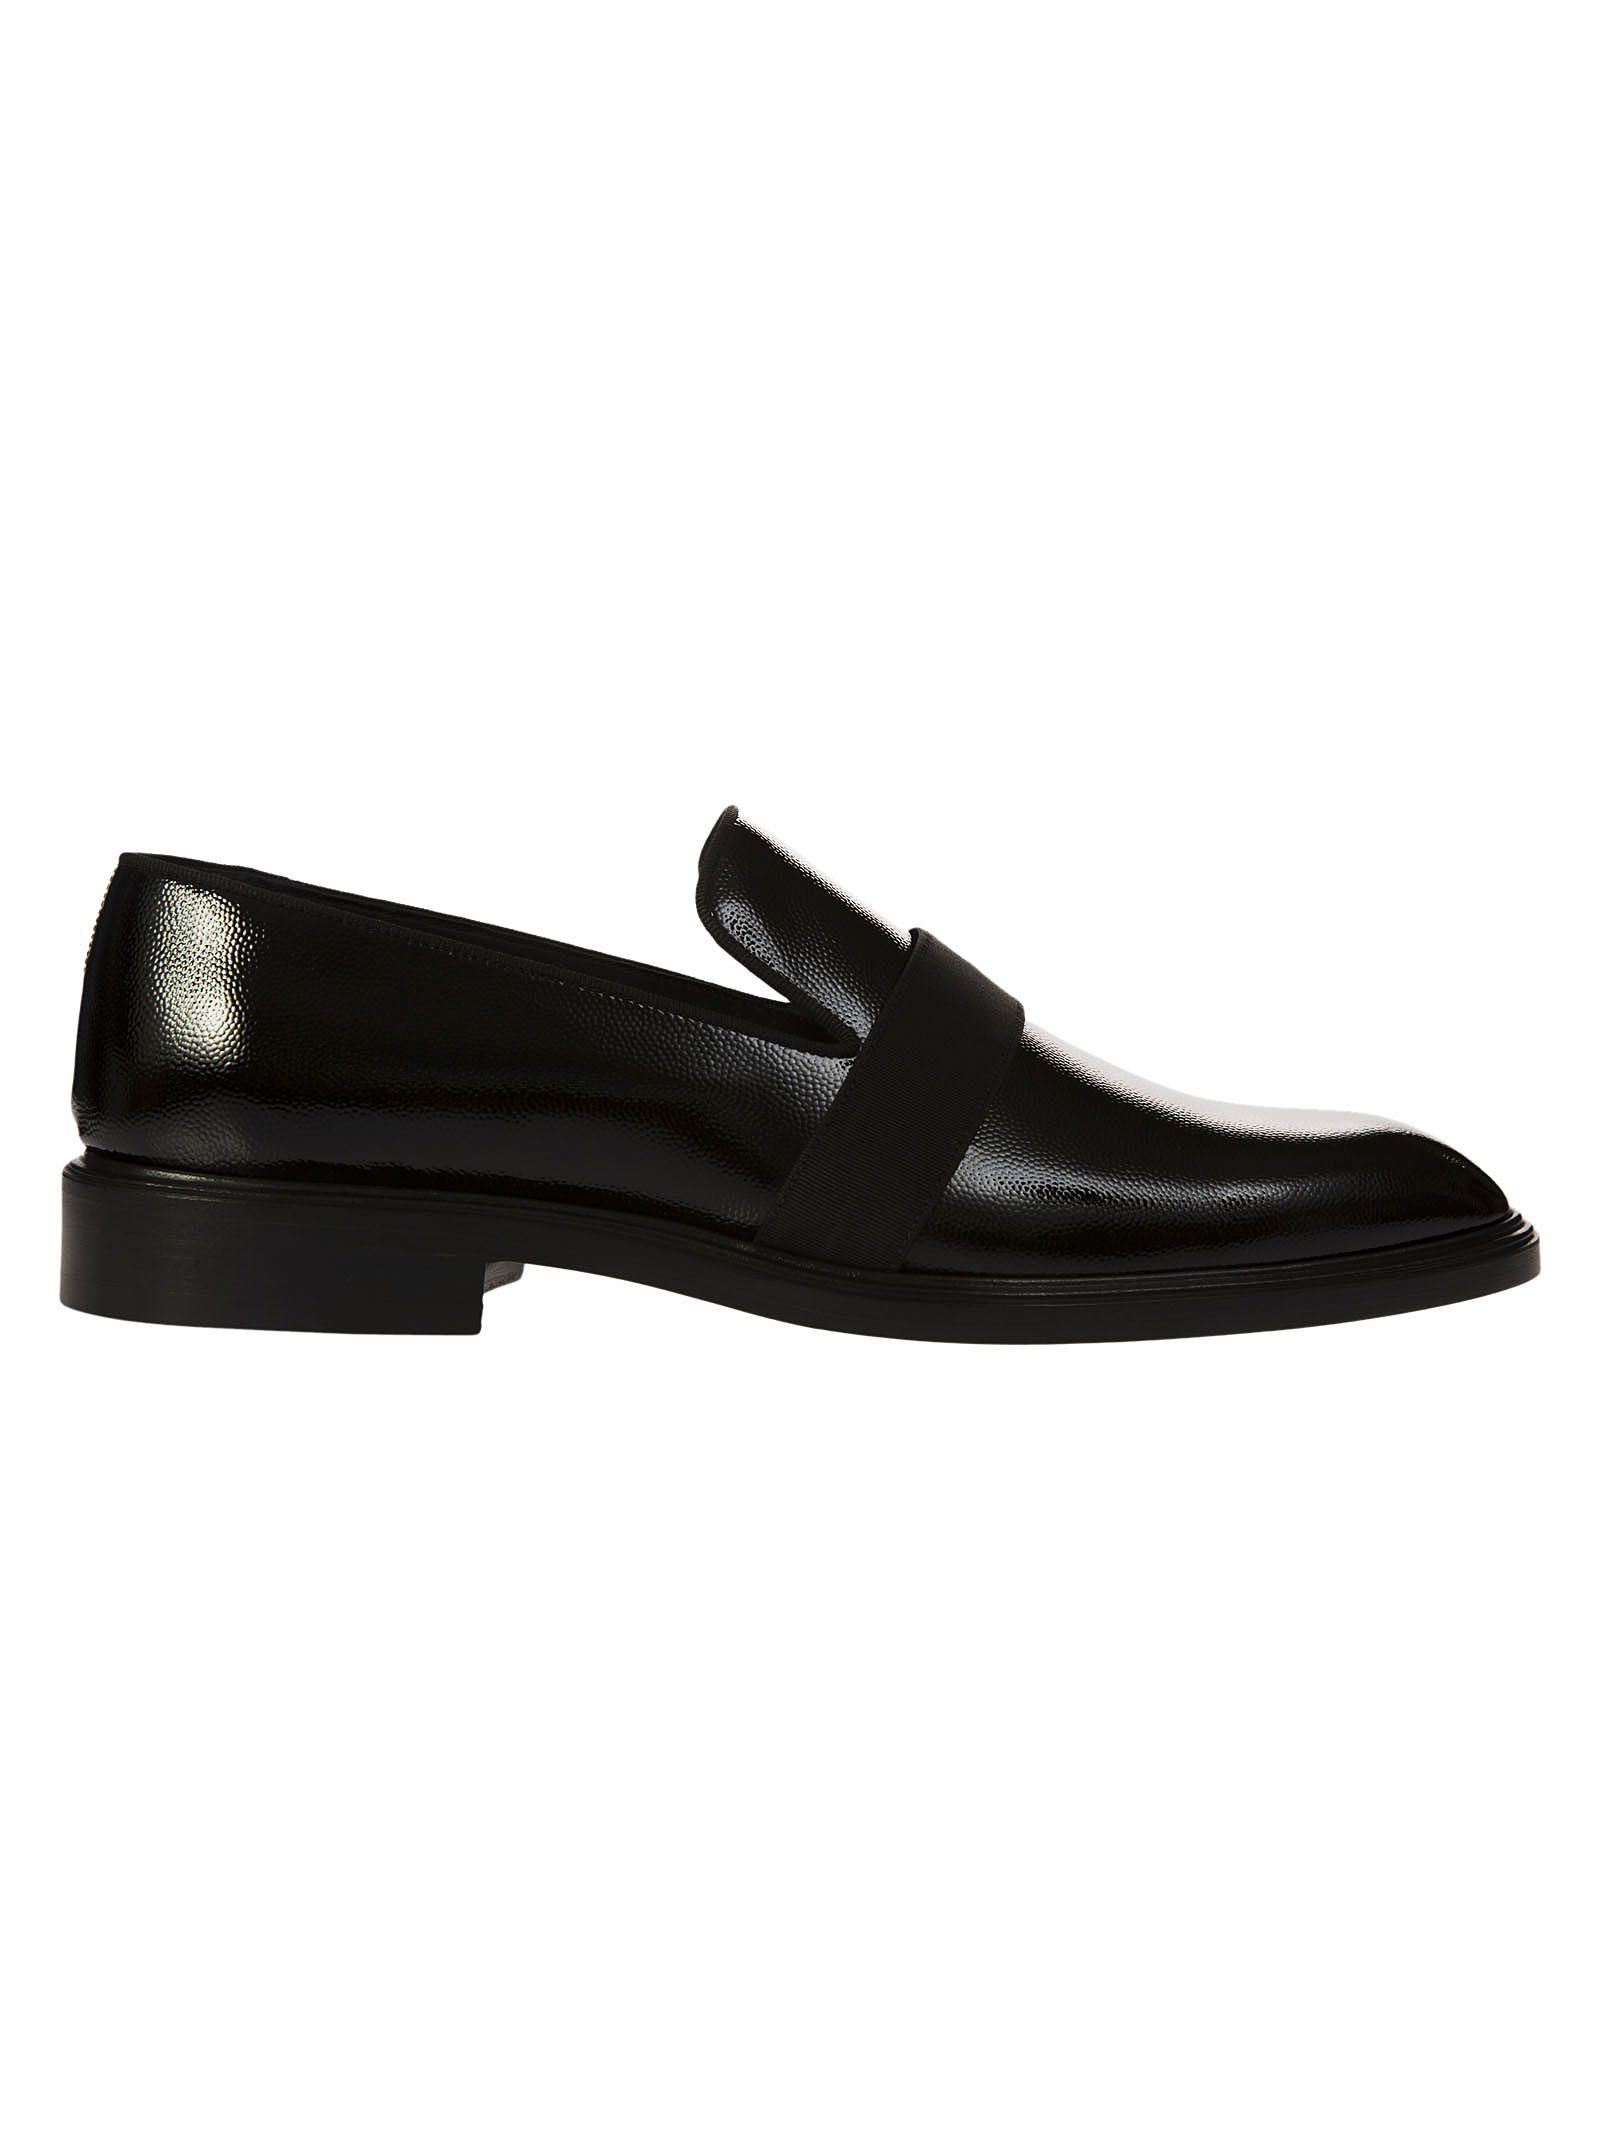 GIVENCHY Rider Patent Formal Loafer With Grosgrain Trim, Black | ModeSens